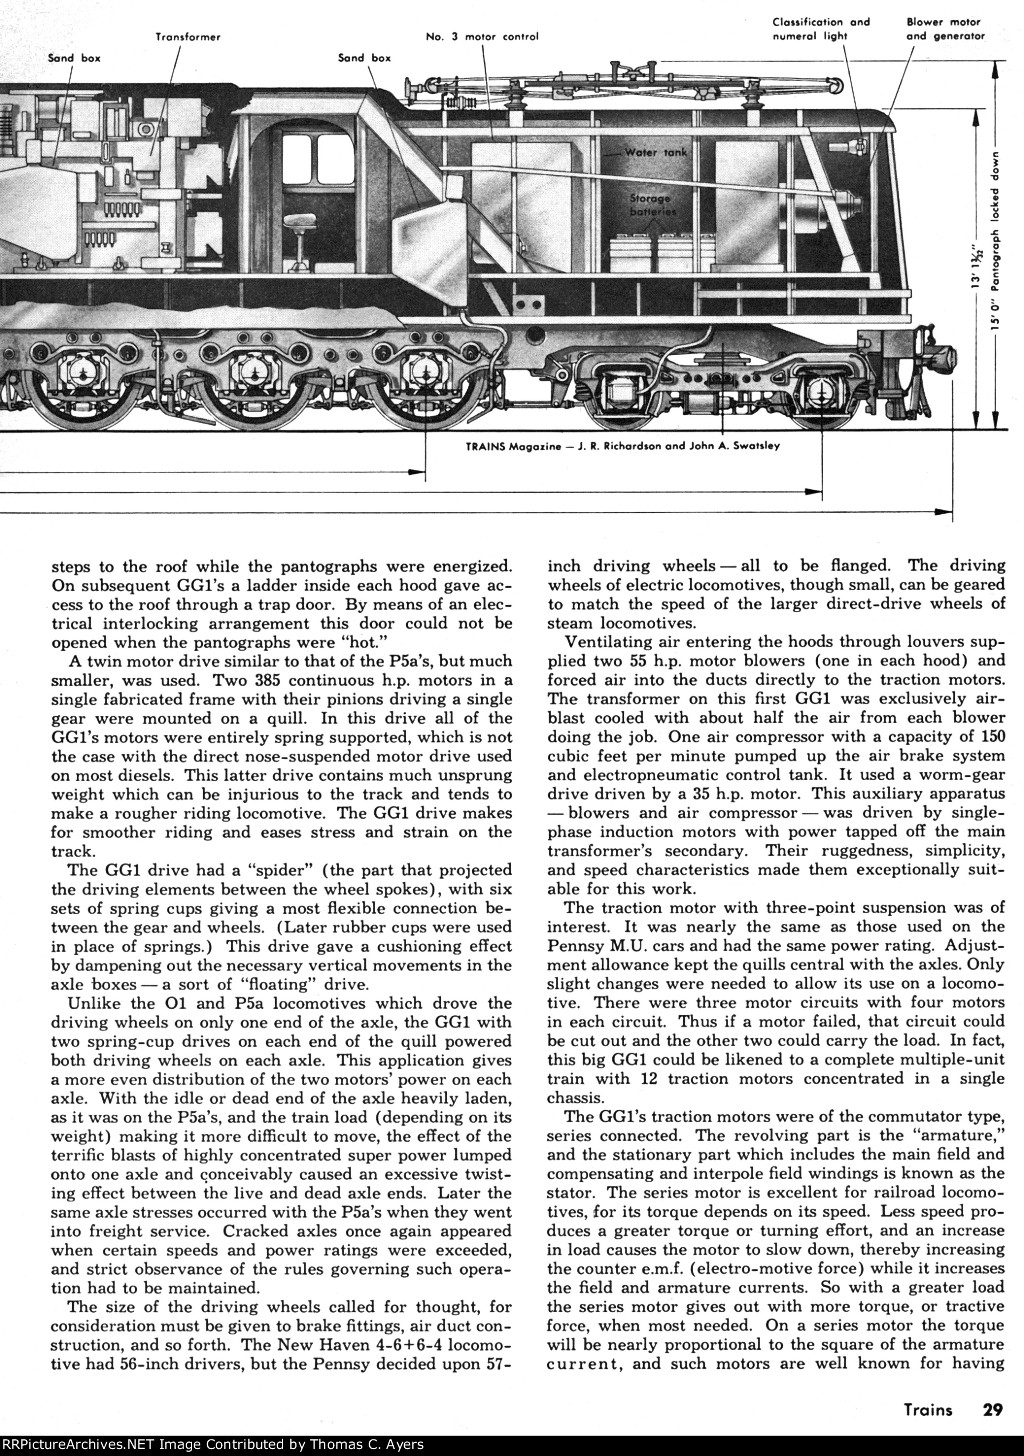 Story Of The GG-1, Page 29, 1964